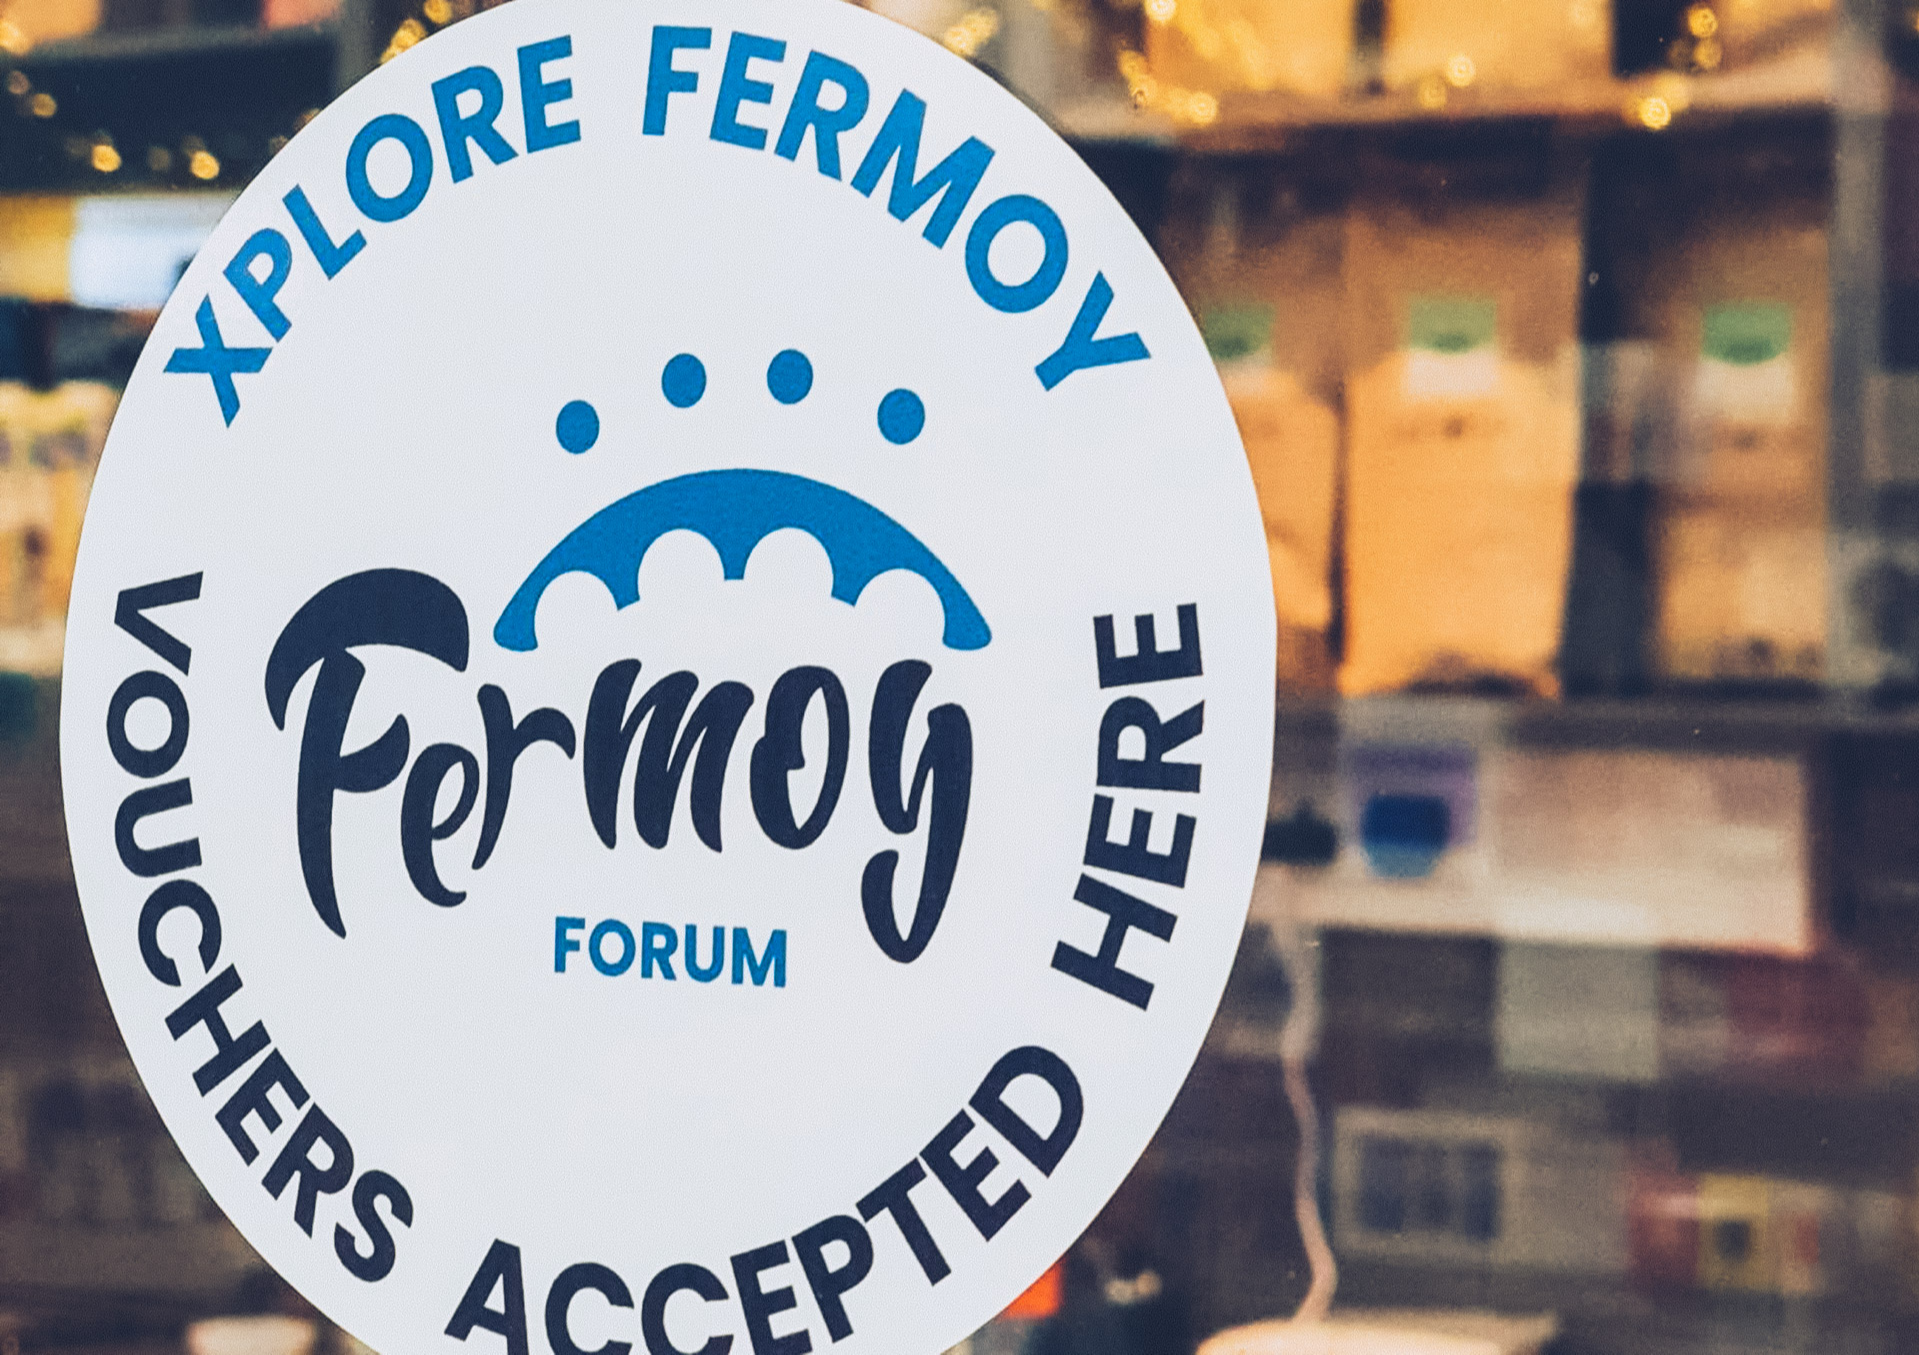 €10,000 Worth of Xplore Fermoy Vouchers Processed in First Month